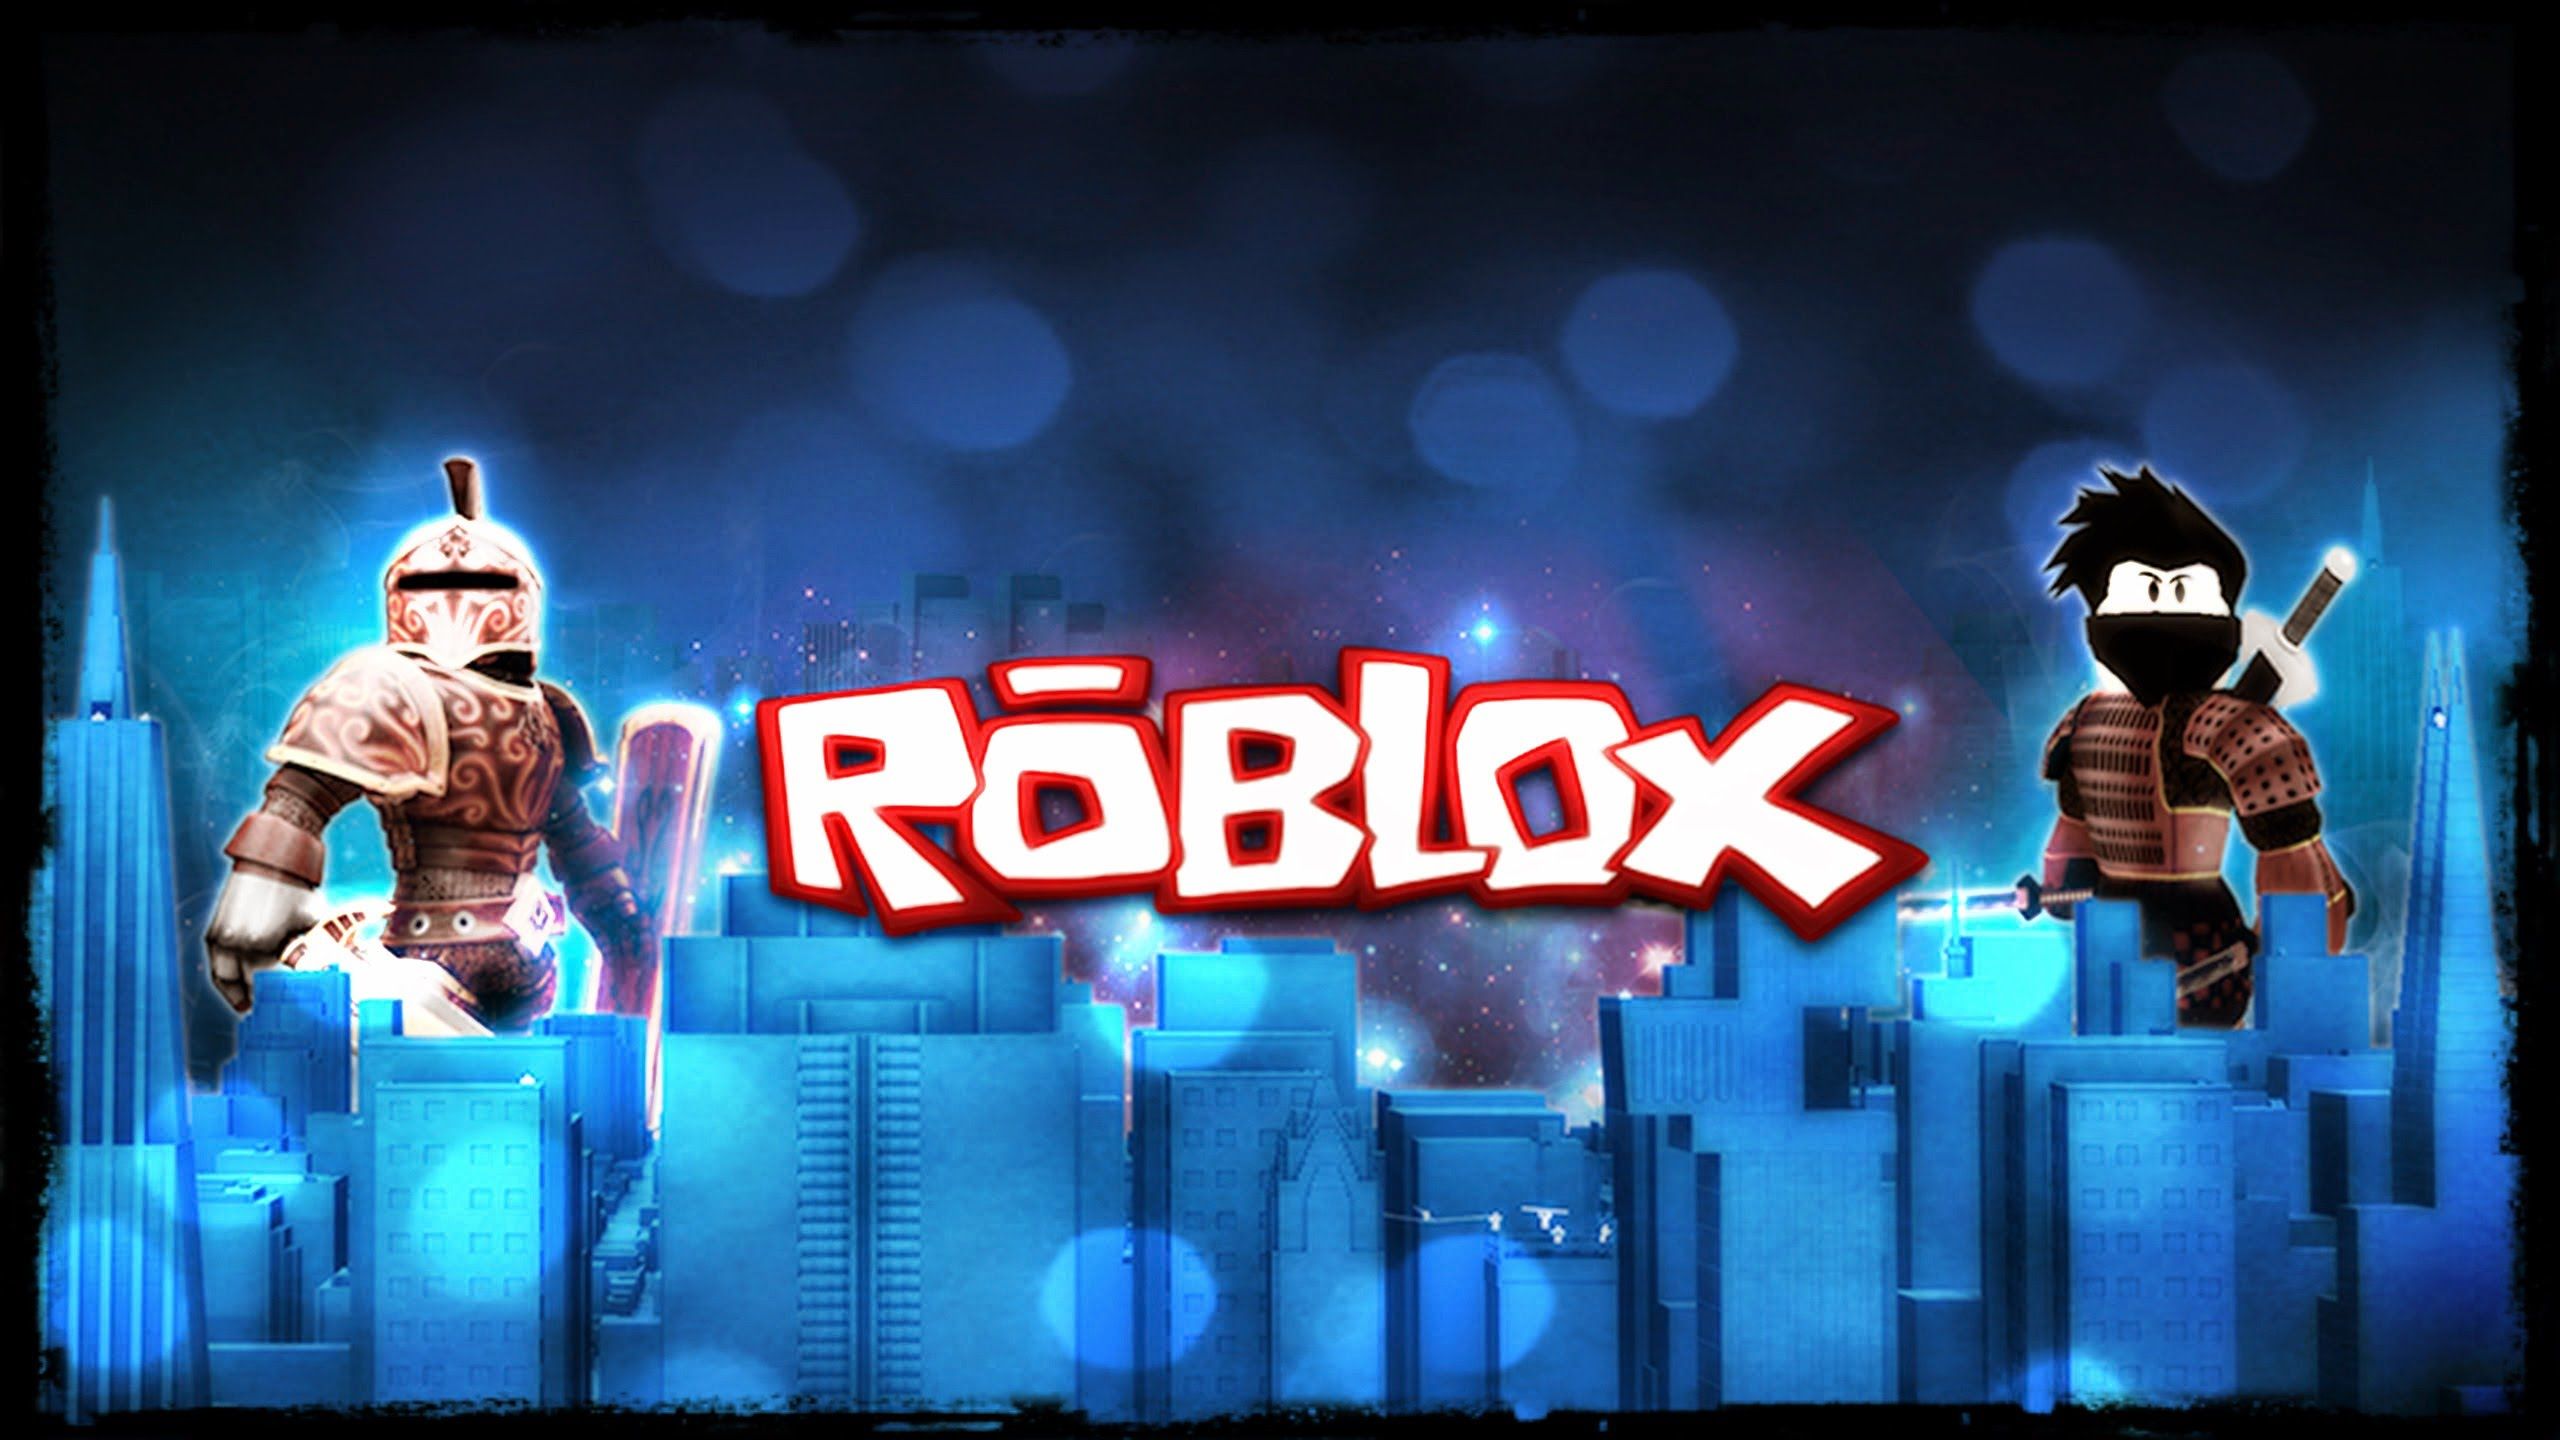 Roblox Wallpaper HD New Tab Roblox Themes, HD Wallpapers & Backgrounds